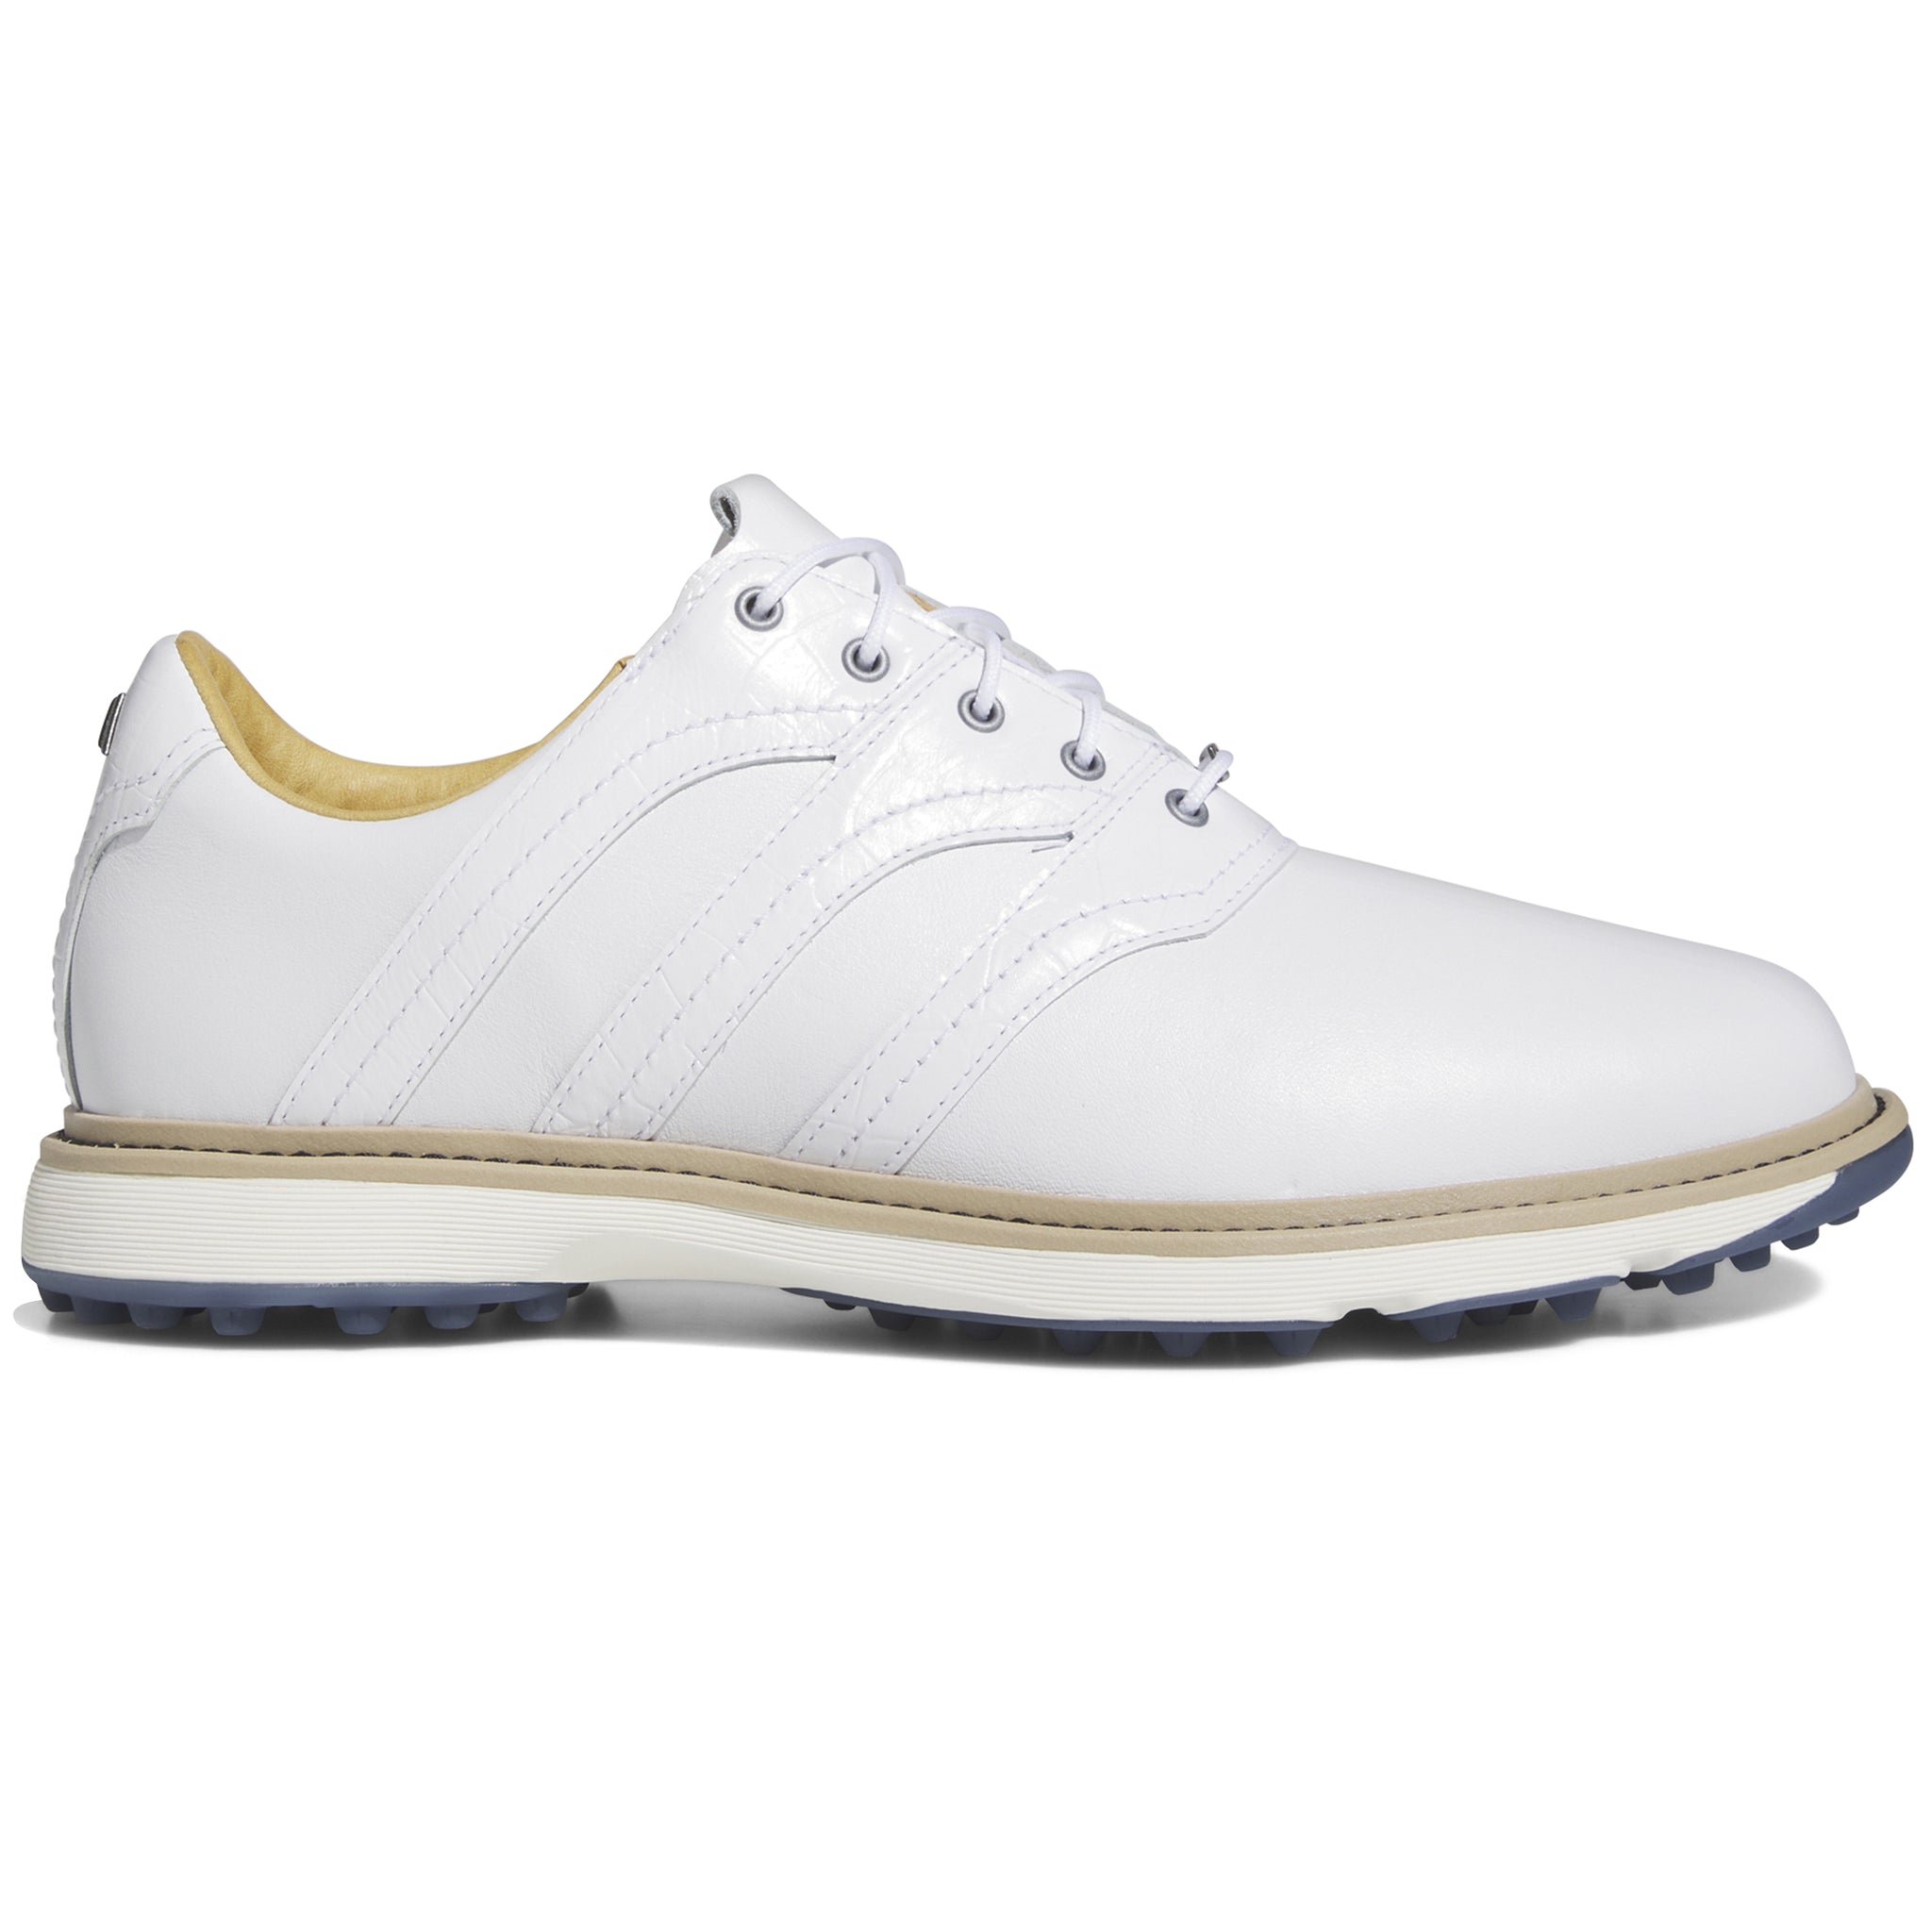 adidas-mc80-z-traxion-golf-shoes-if2713-white-preloved-ink